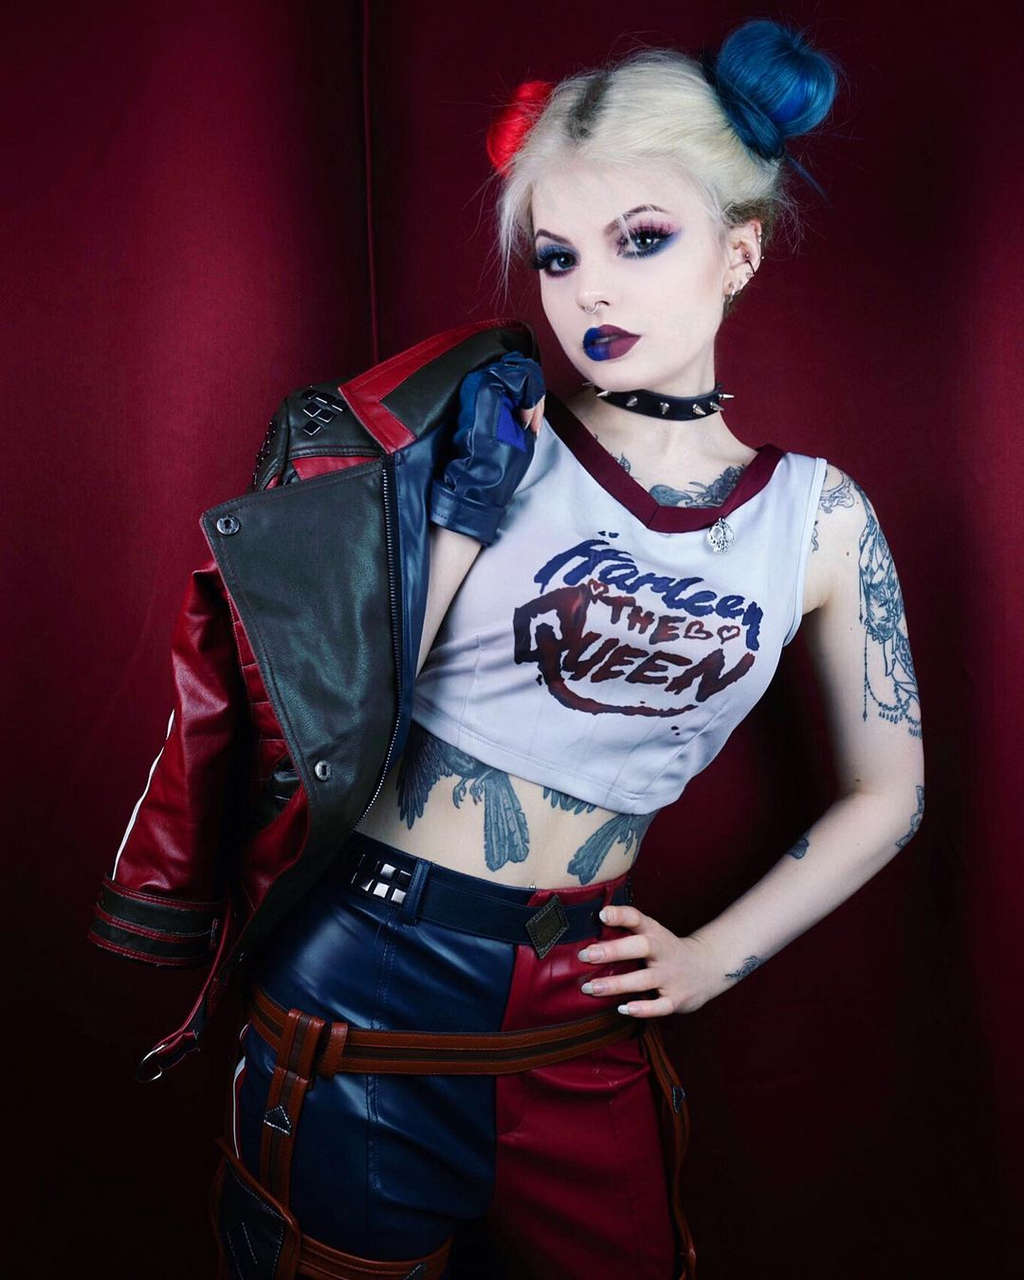 Faerie Blossom As Harley Quin